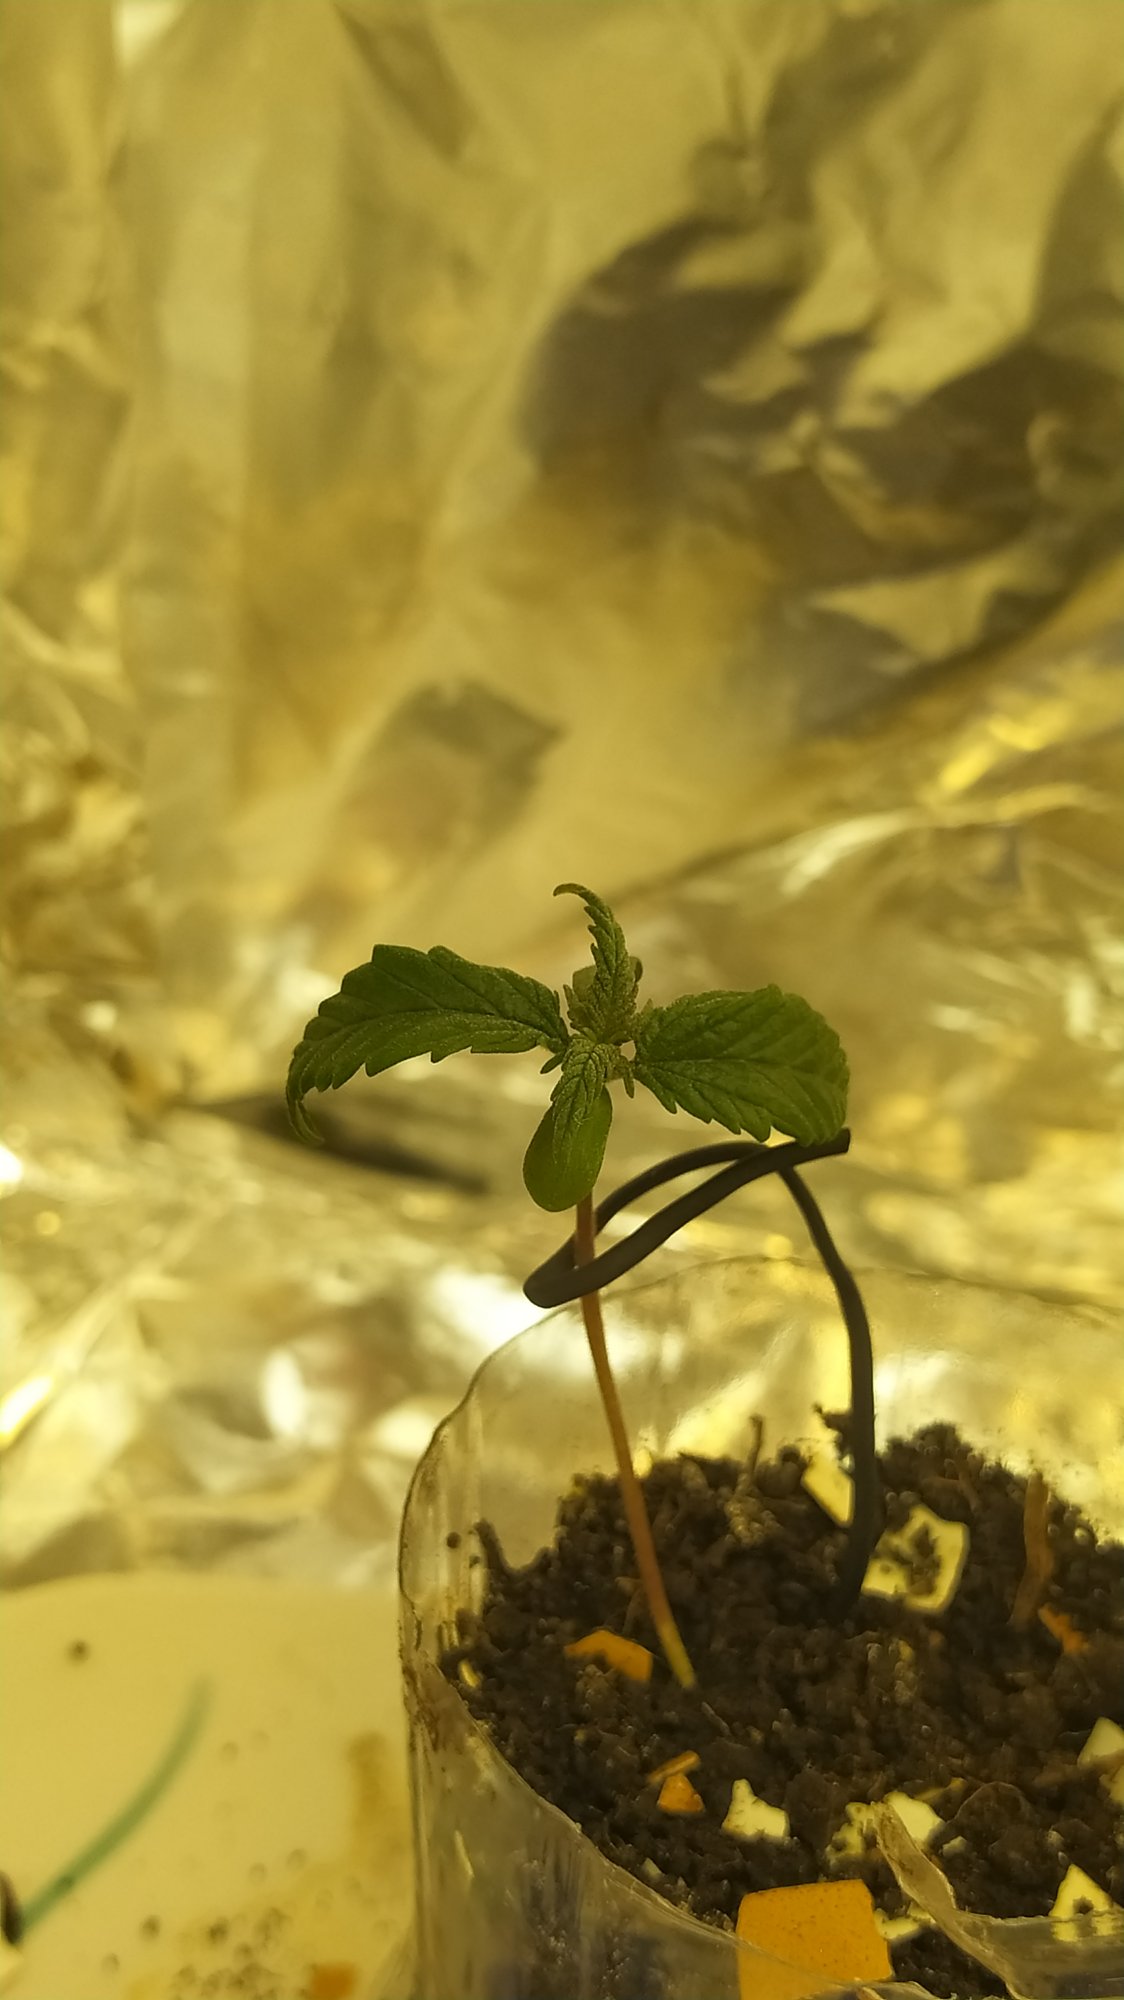 Seedling 7th day leaves issue